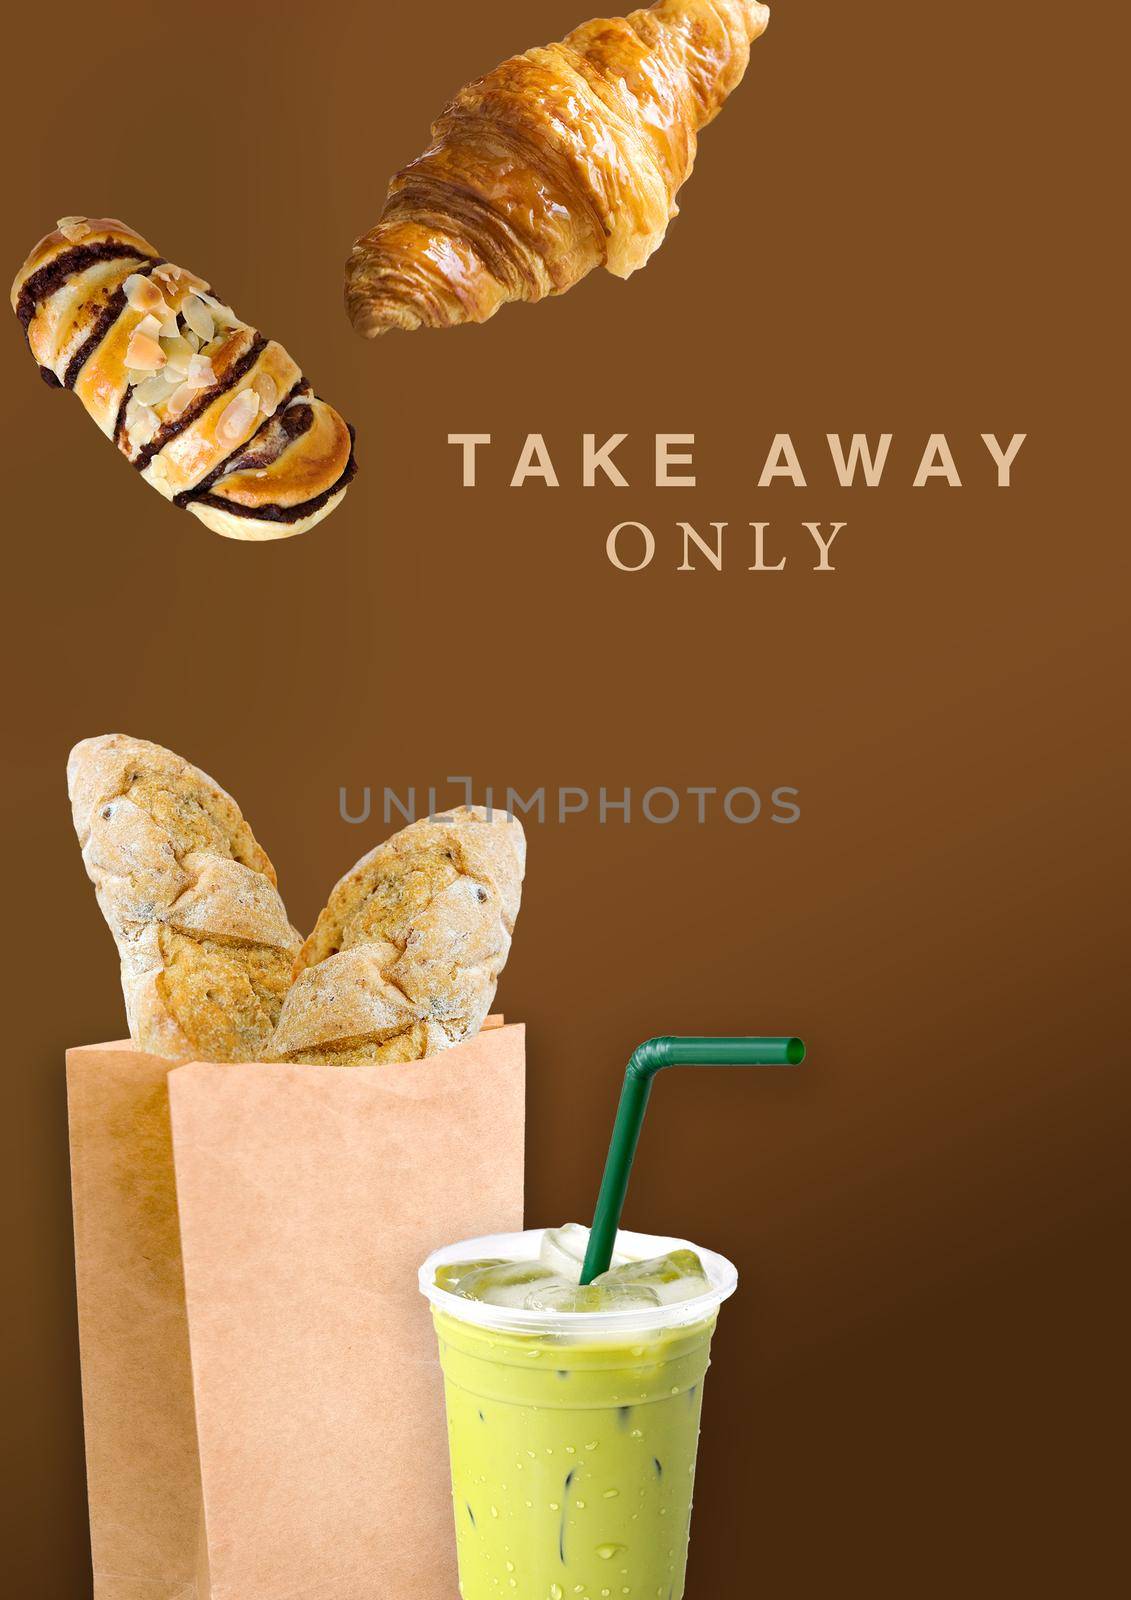 Takeaway Pastries concept with Message on Background by daniaphoto